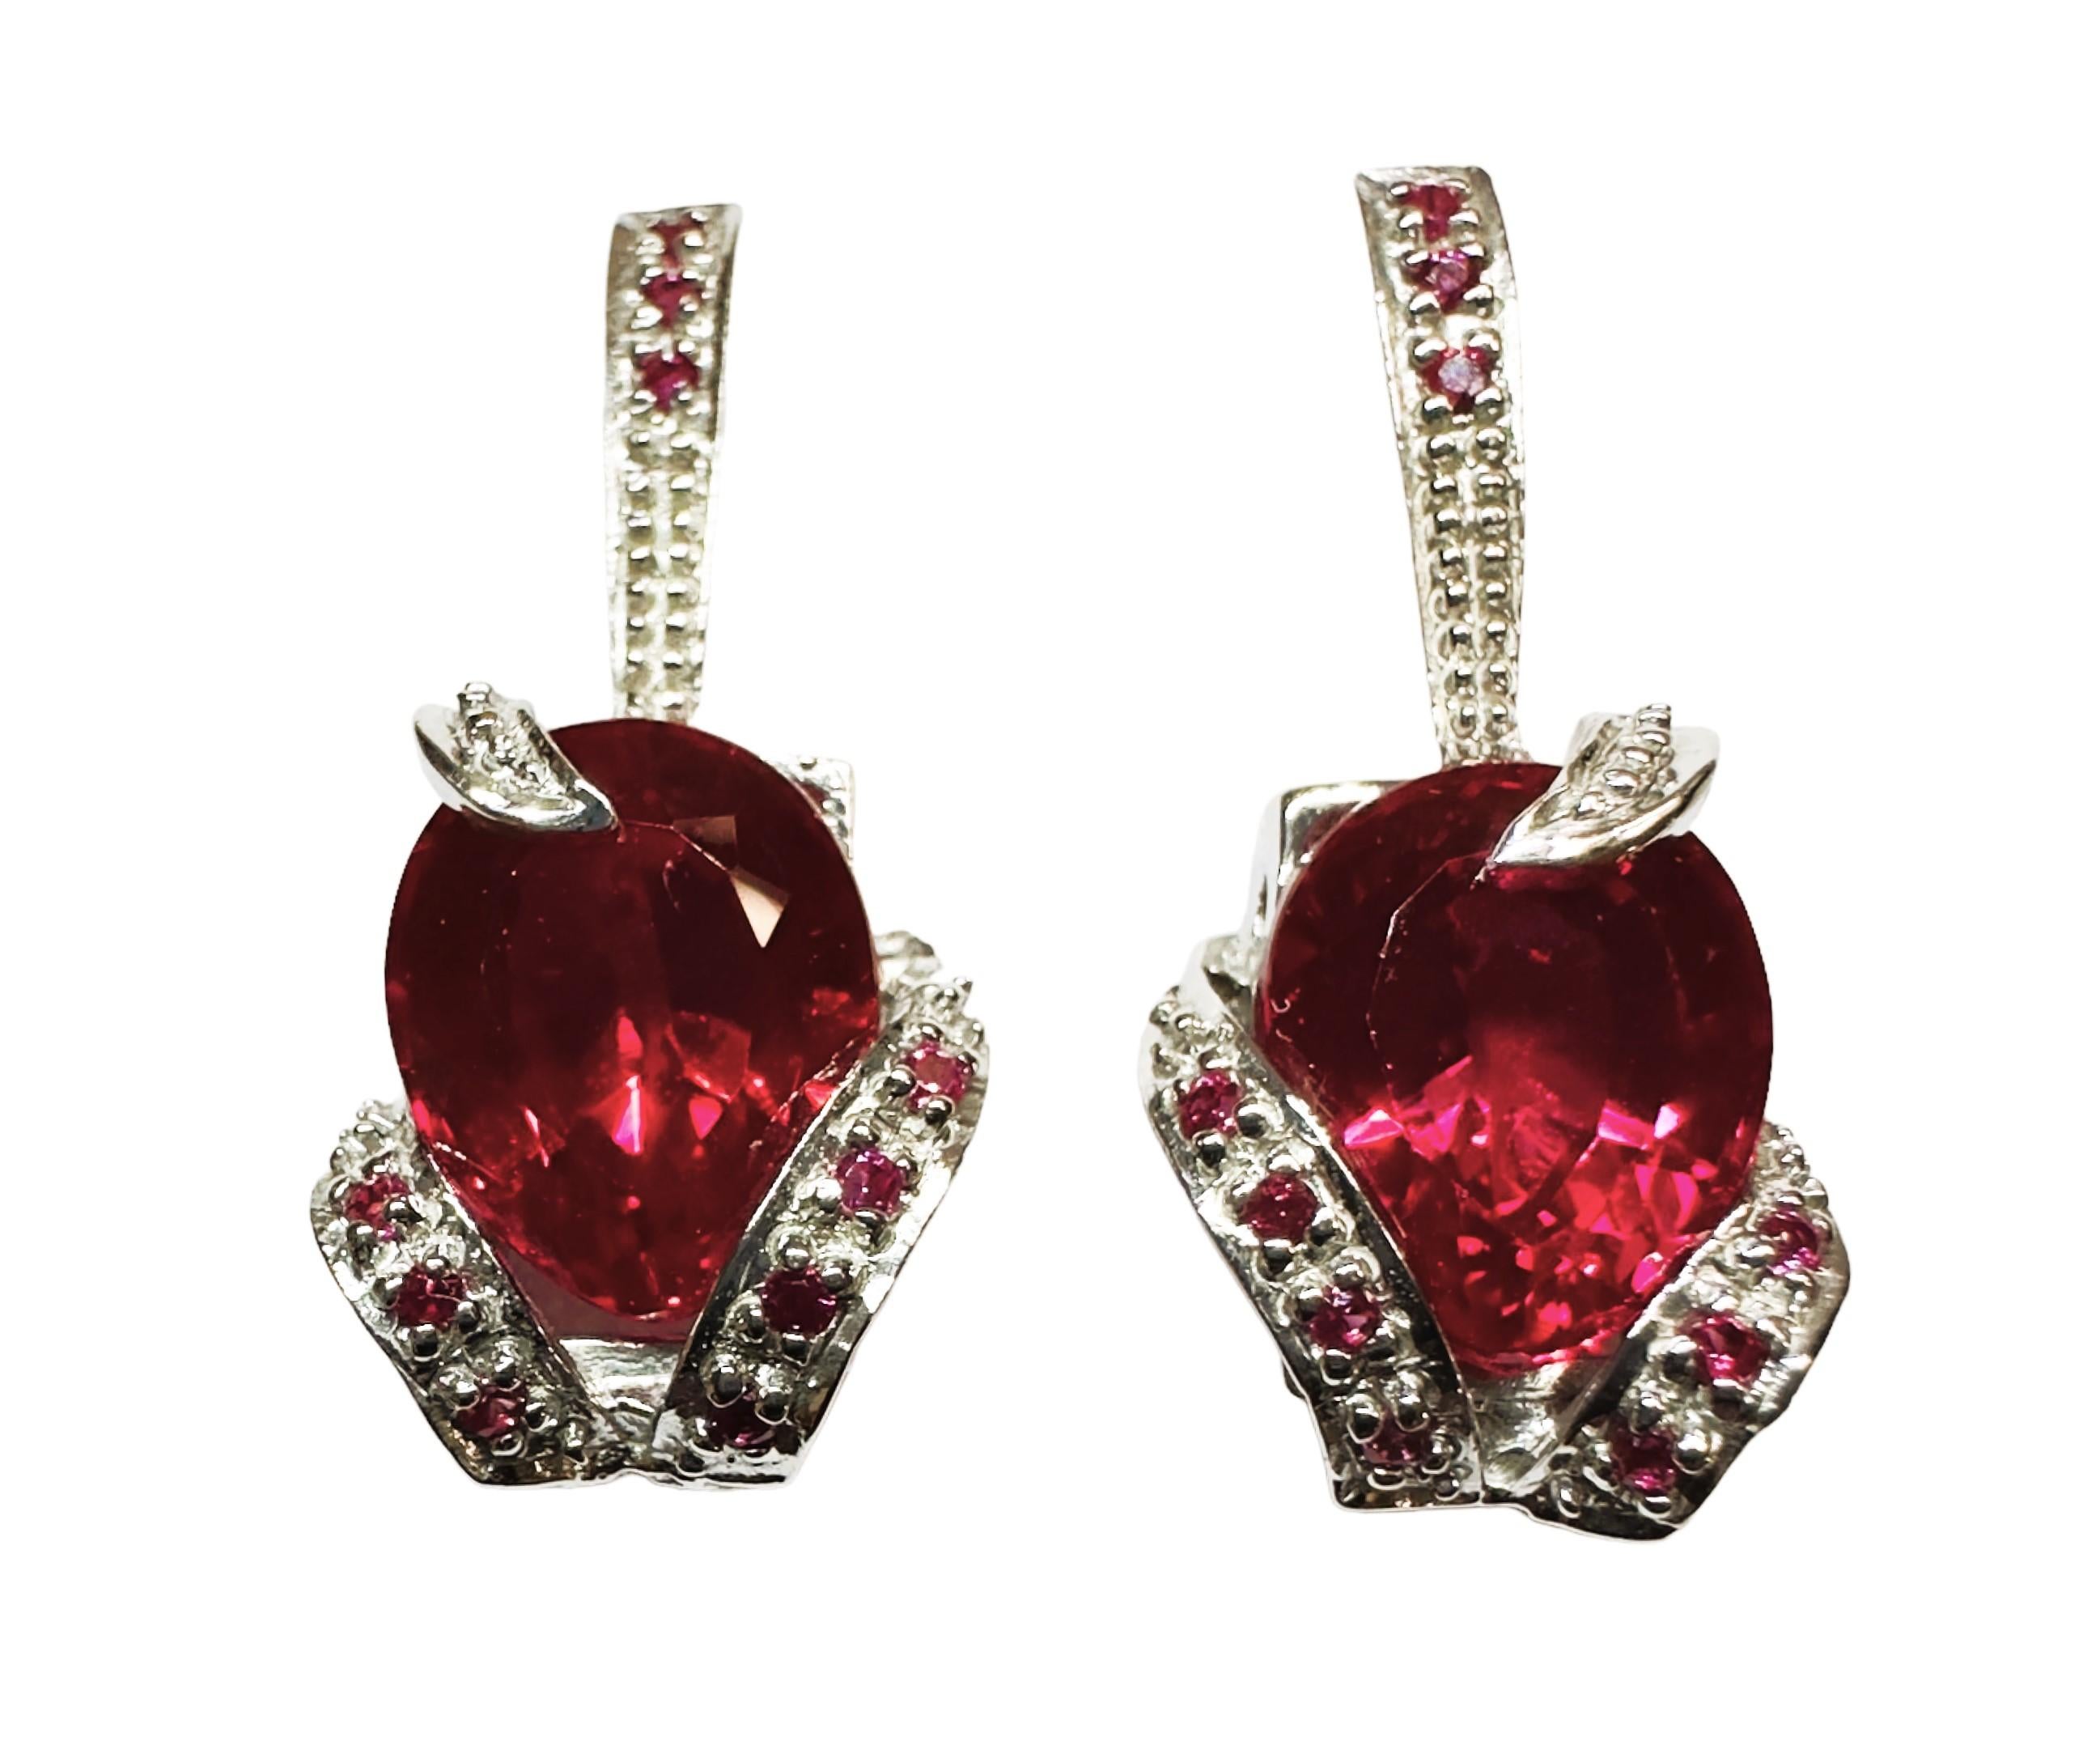 New African 9.70 Ct Pinkish Red Sapphire Sterling Earrings In New Condition For Sale In Eagan, MN